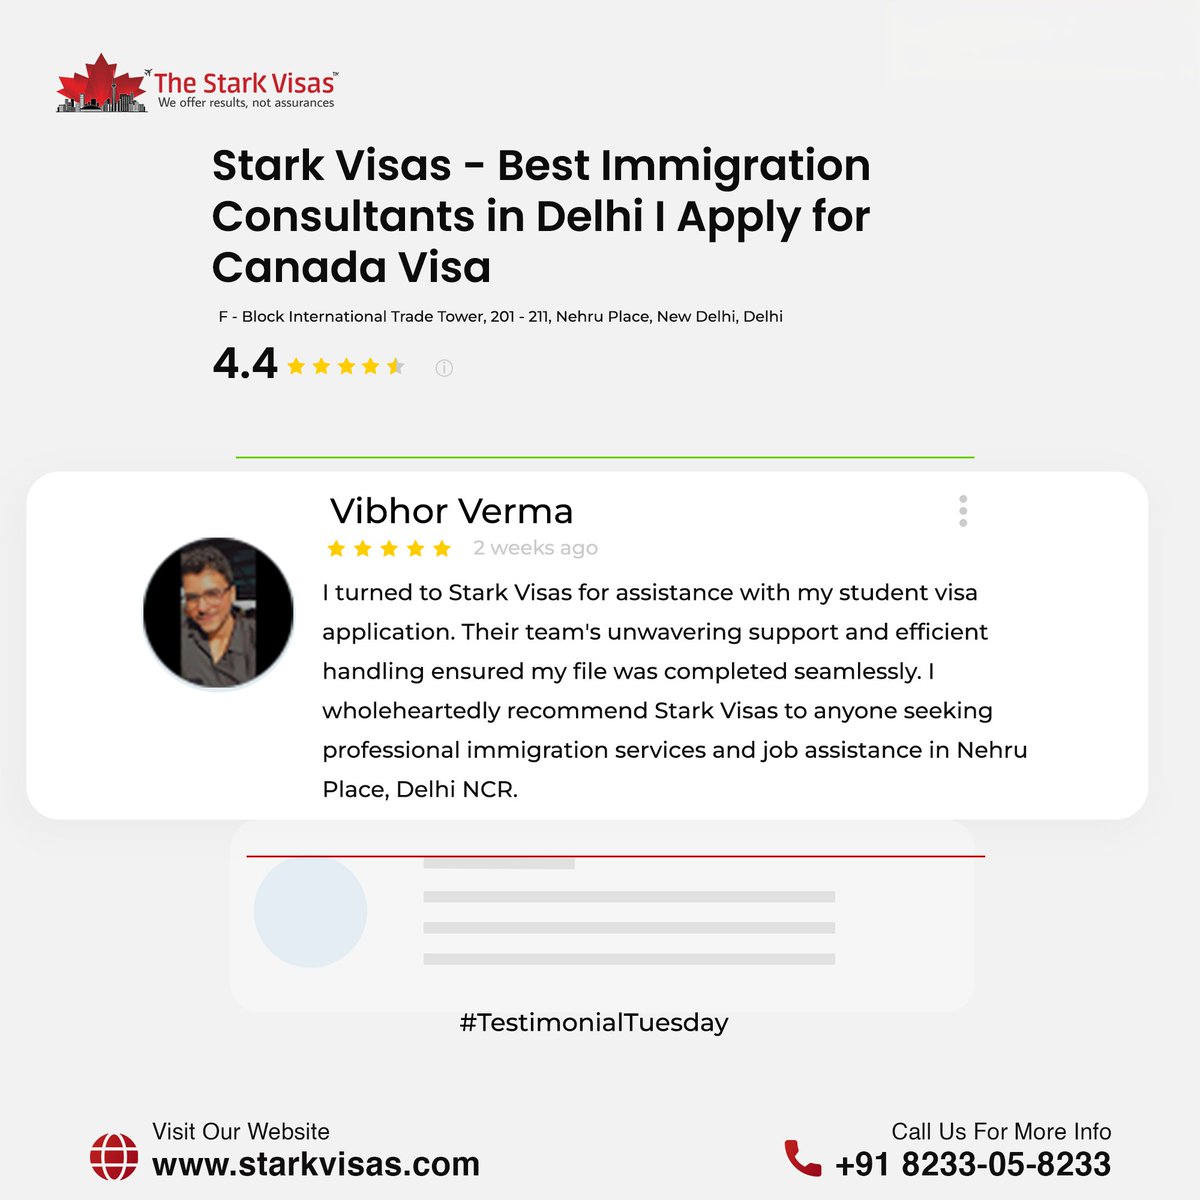 Congratulations Mr. Vibhor Verma!!🥳

We wish you a happy and safe journey🛬

May you have a bright career ahead🏵

#StudyVisaApproval #studyvisa #studentvisa #visaexperts #happycustomer #clientreview #clienttestimonial #clientfeedback #starkvisas #thestarkvisas